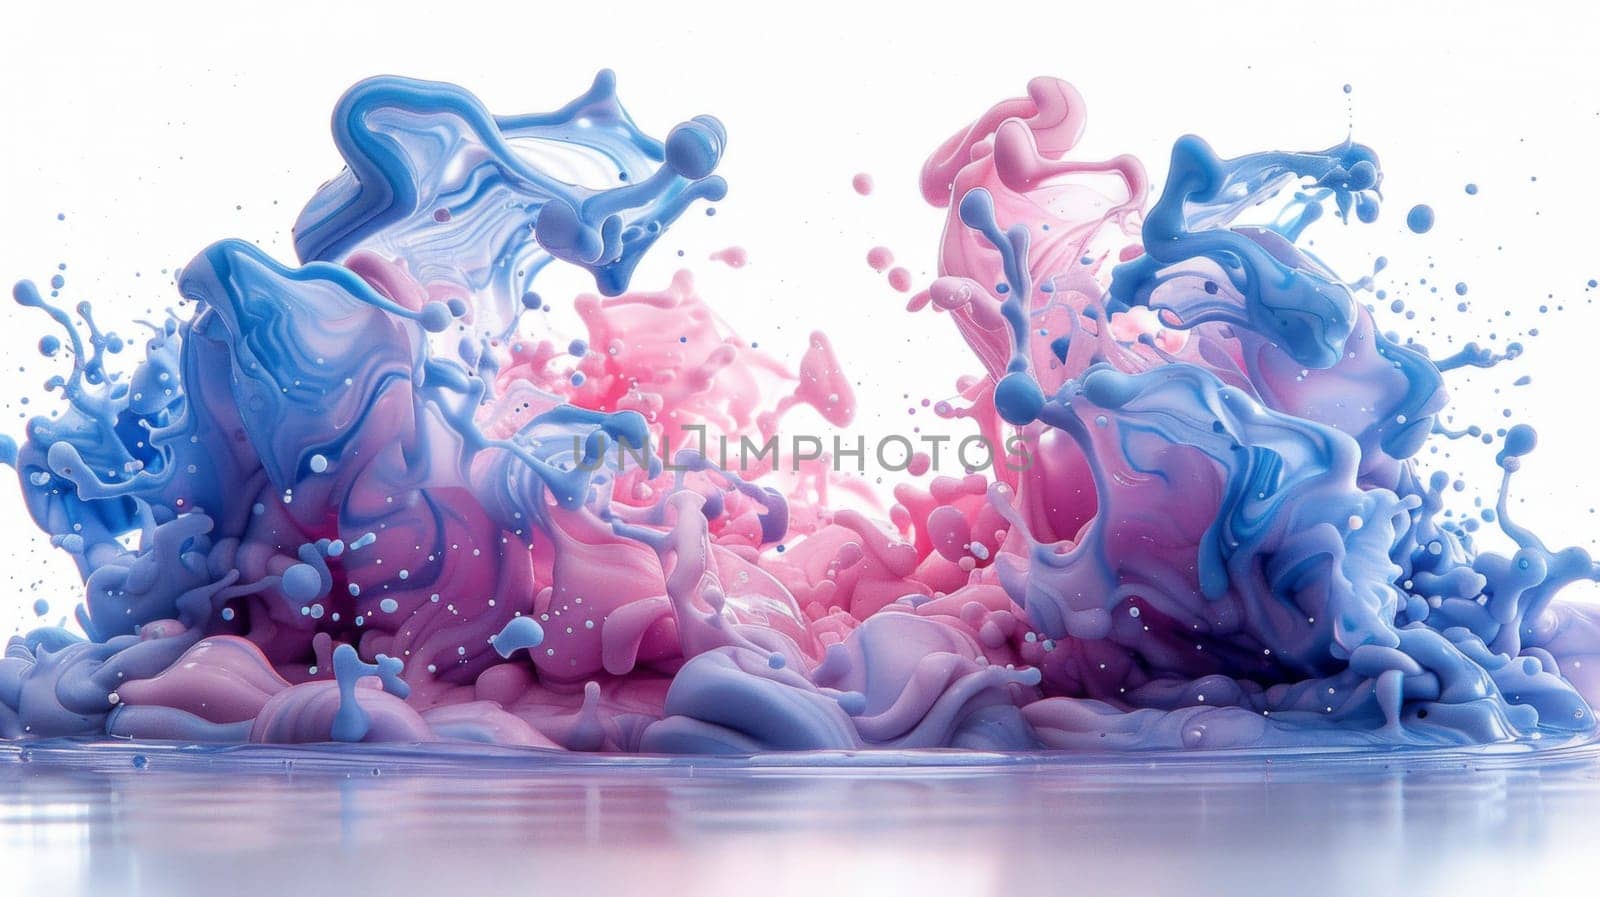 Blue and pink paint swirls and splashes gracefully into the water, creating a mesmerizing and colorful spectacle.